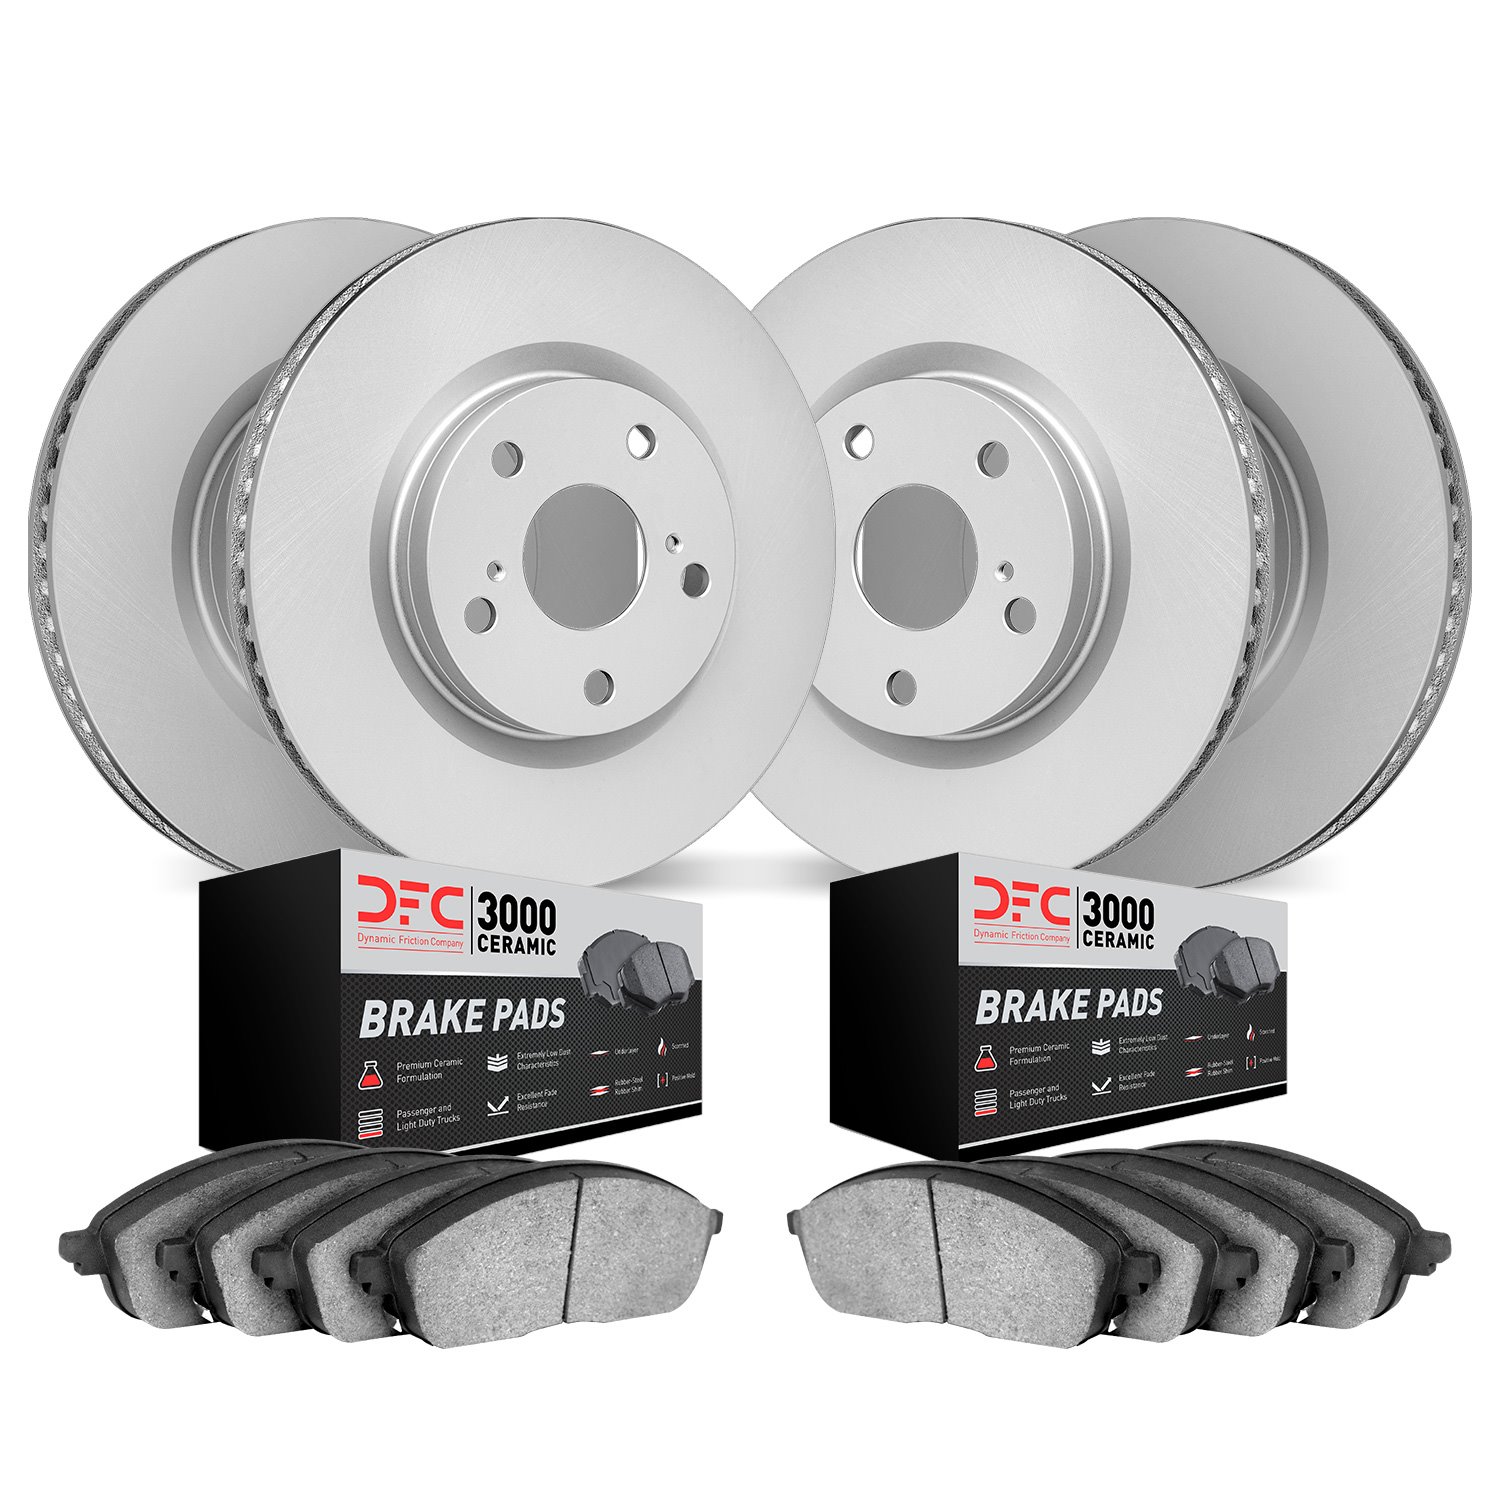 4304-02001 Geospec Brake Rotors with 3000-Series Ceramic Brake Pads Kit, 1977-1988 Porsche, Position: Front and Rear